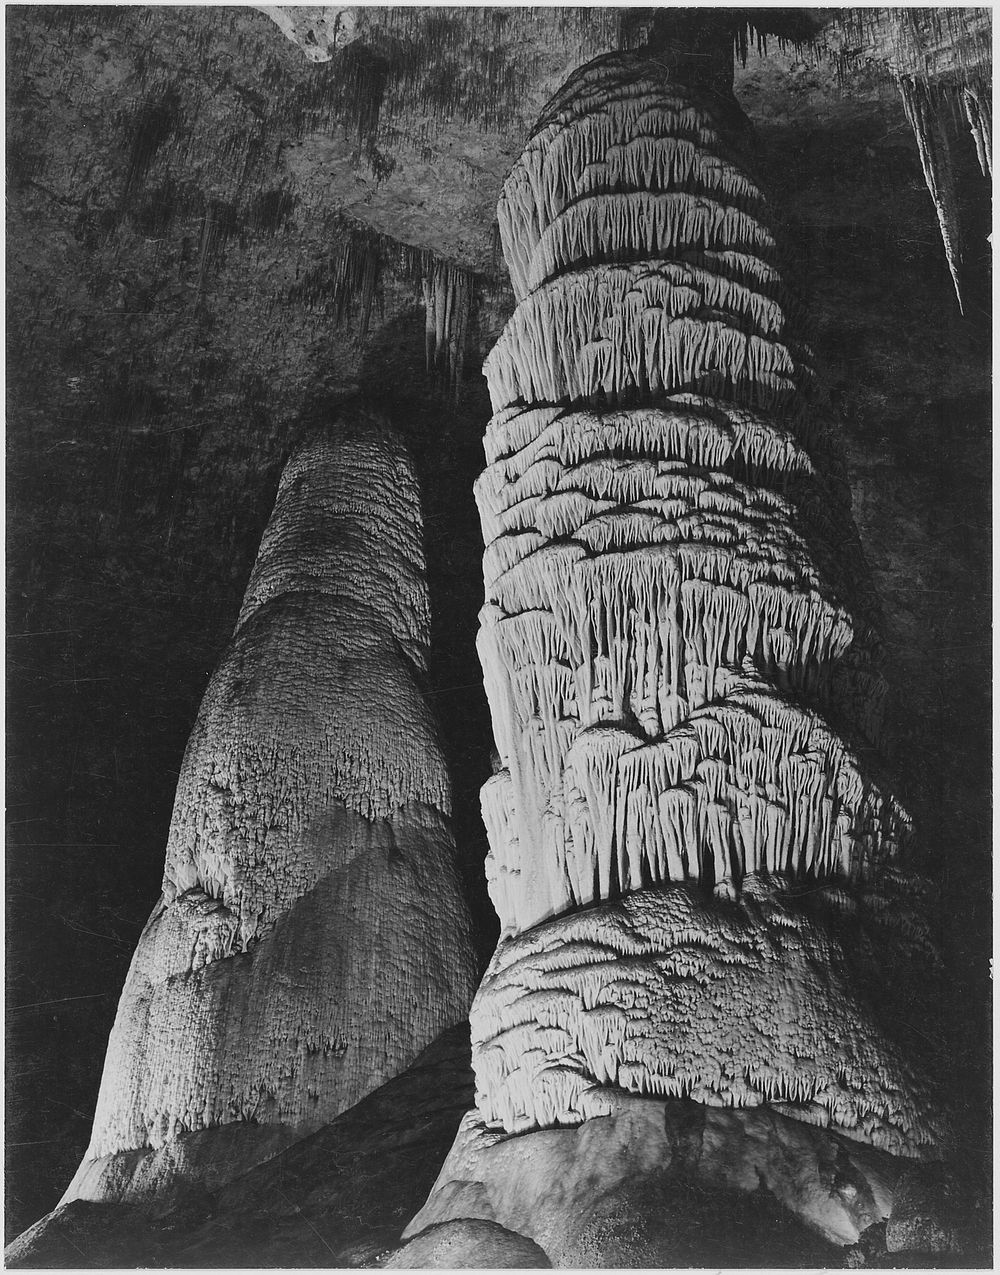 "The Giant Dome, largest stalagmite thus far discovered. It is 16 feet in diameter and estimated to be 60 million years old.…